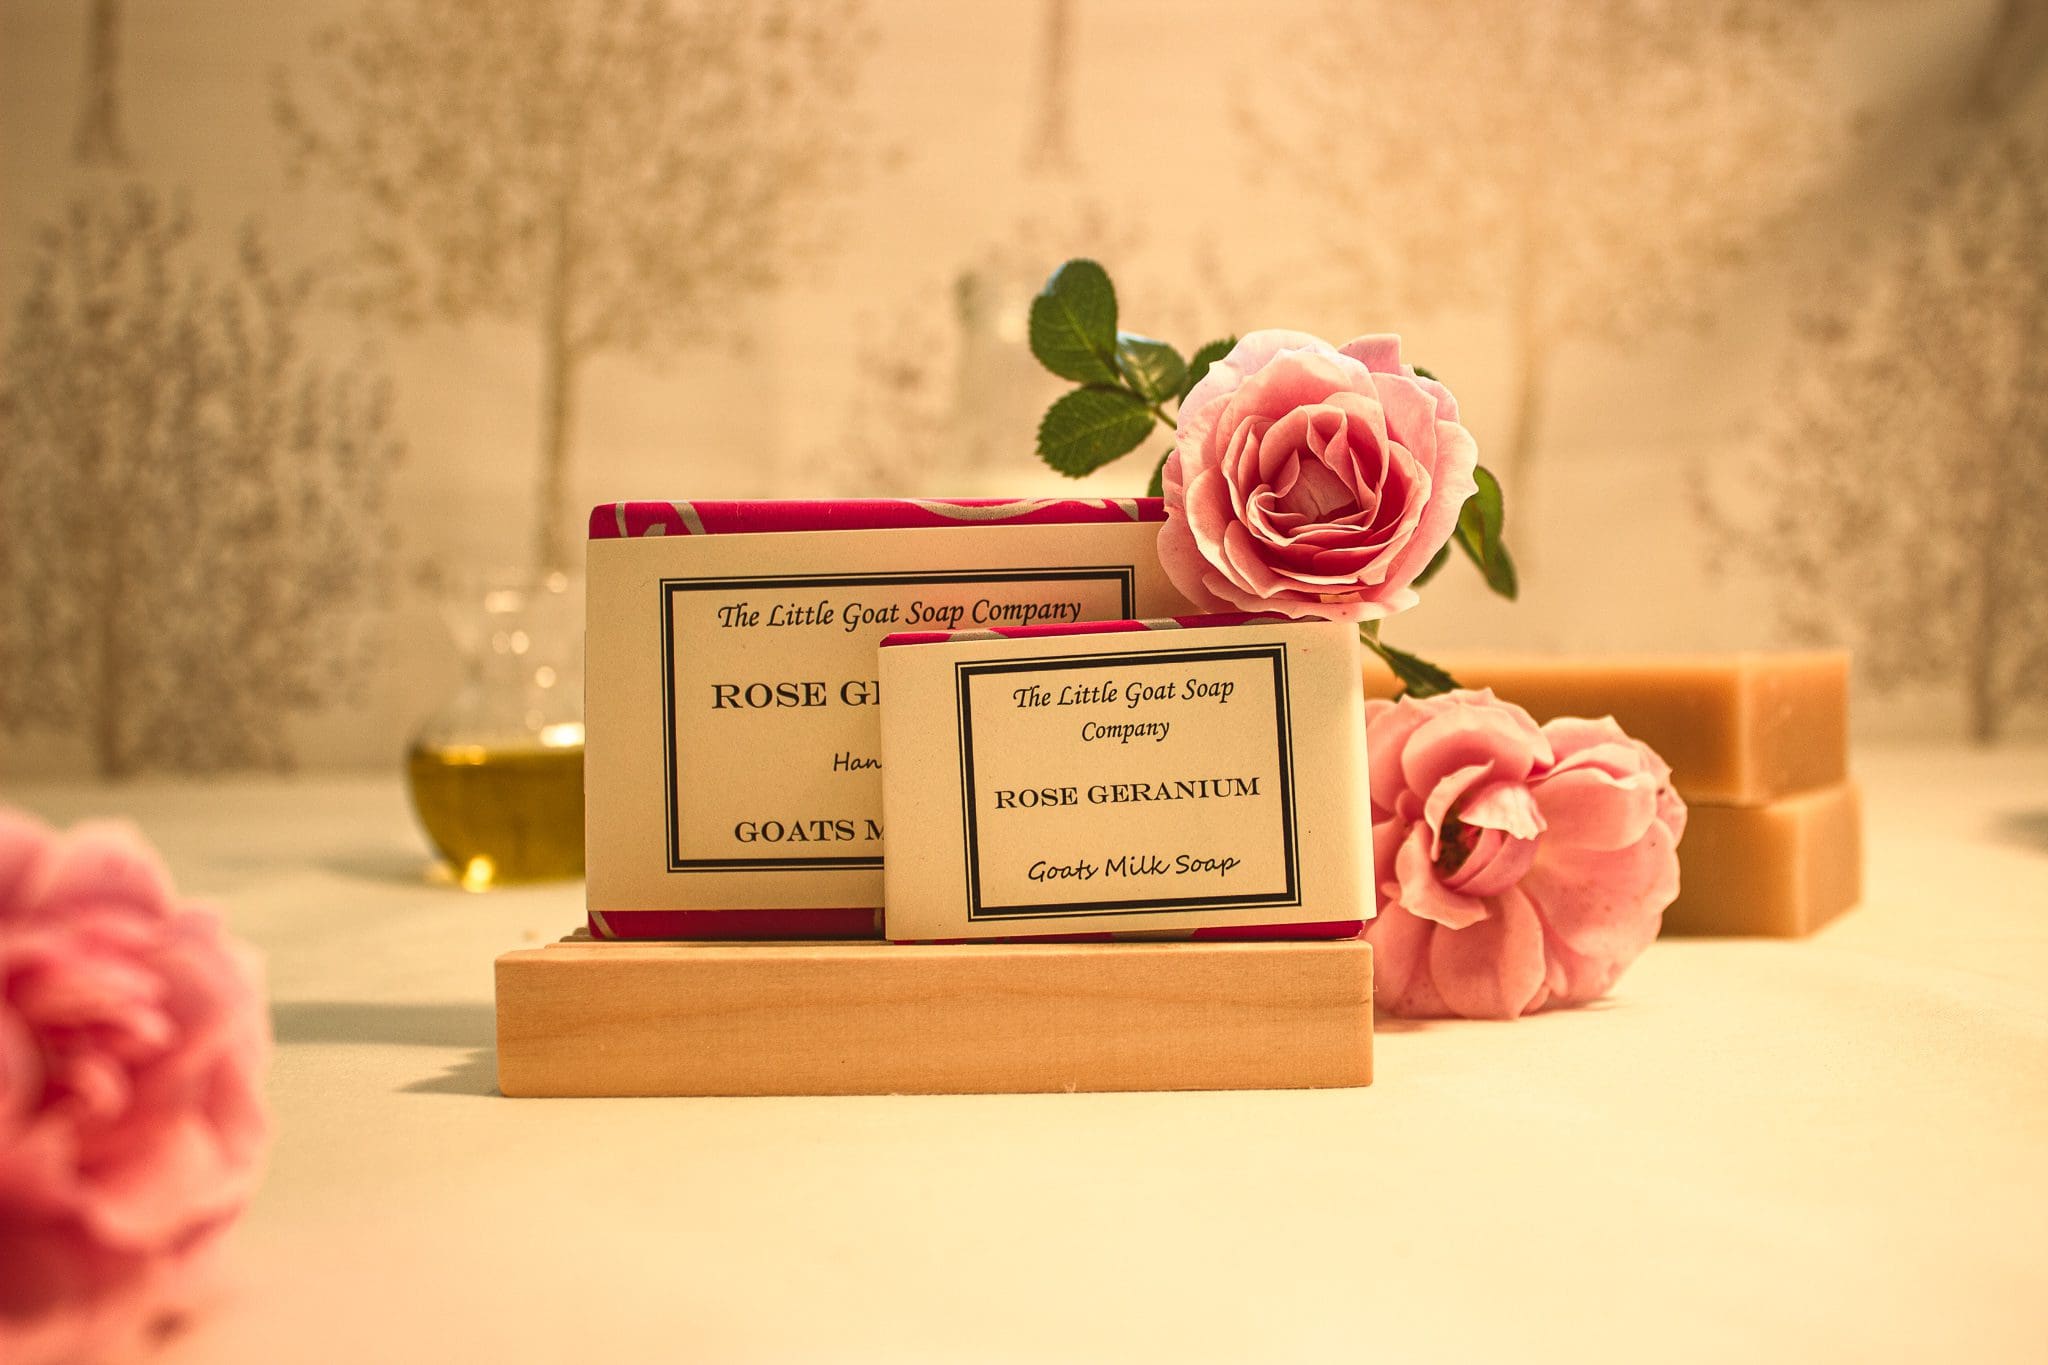 Rose Geranium soap from The Little Goat Soap Company set dressed with pink roses and bars of unwrapped soap